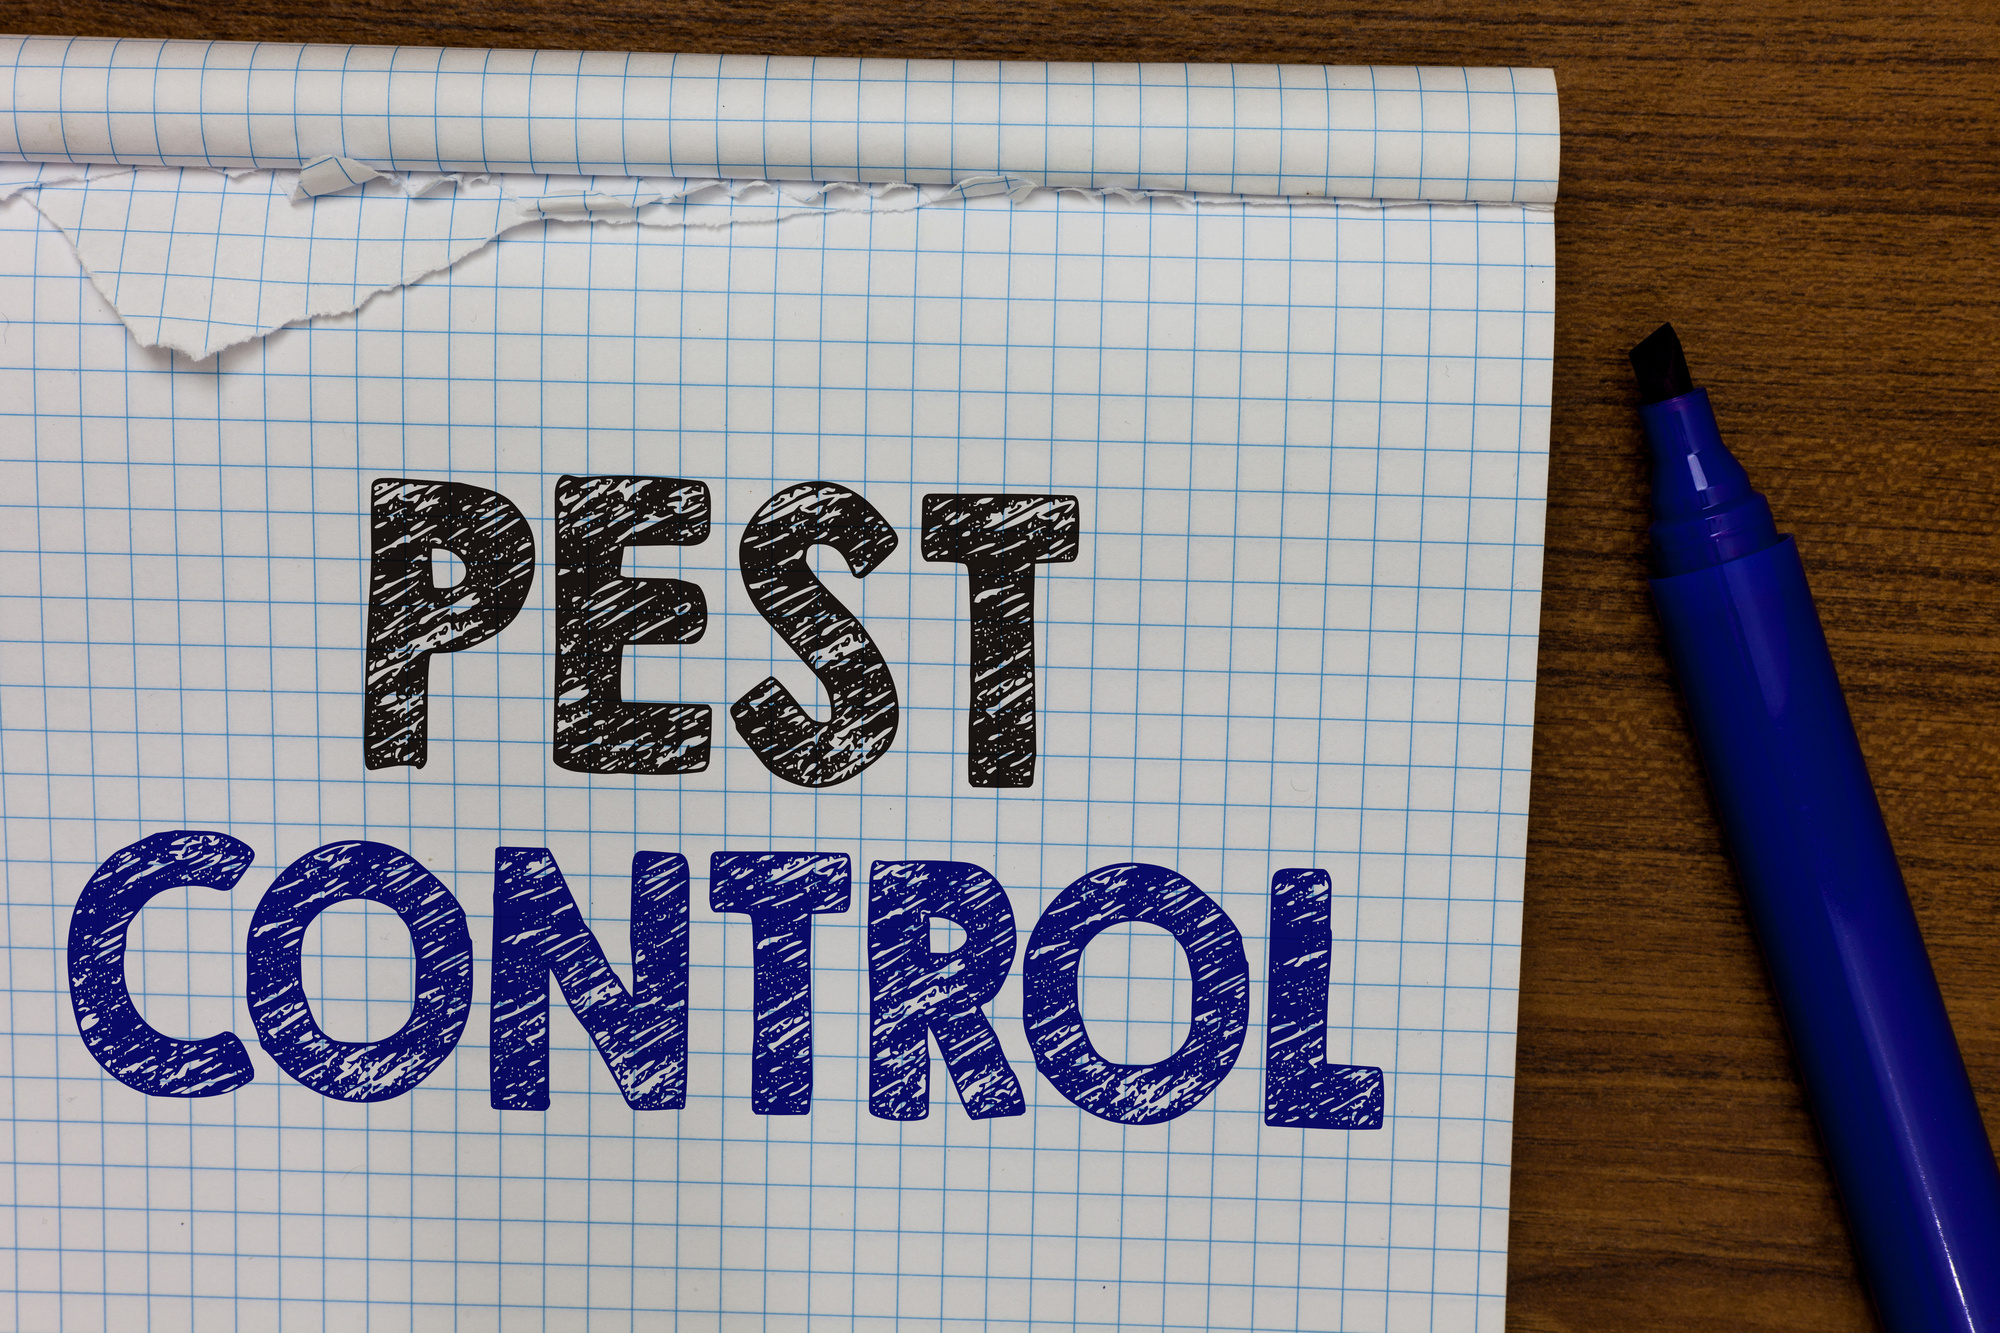 Are you wondering if exterior pest control is really necessary? Click here for five great reasons you should hire outdoor pest control services for your home.